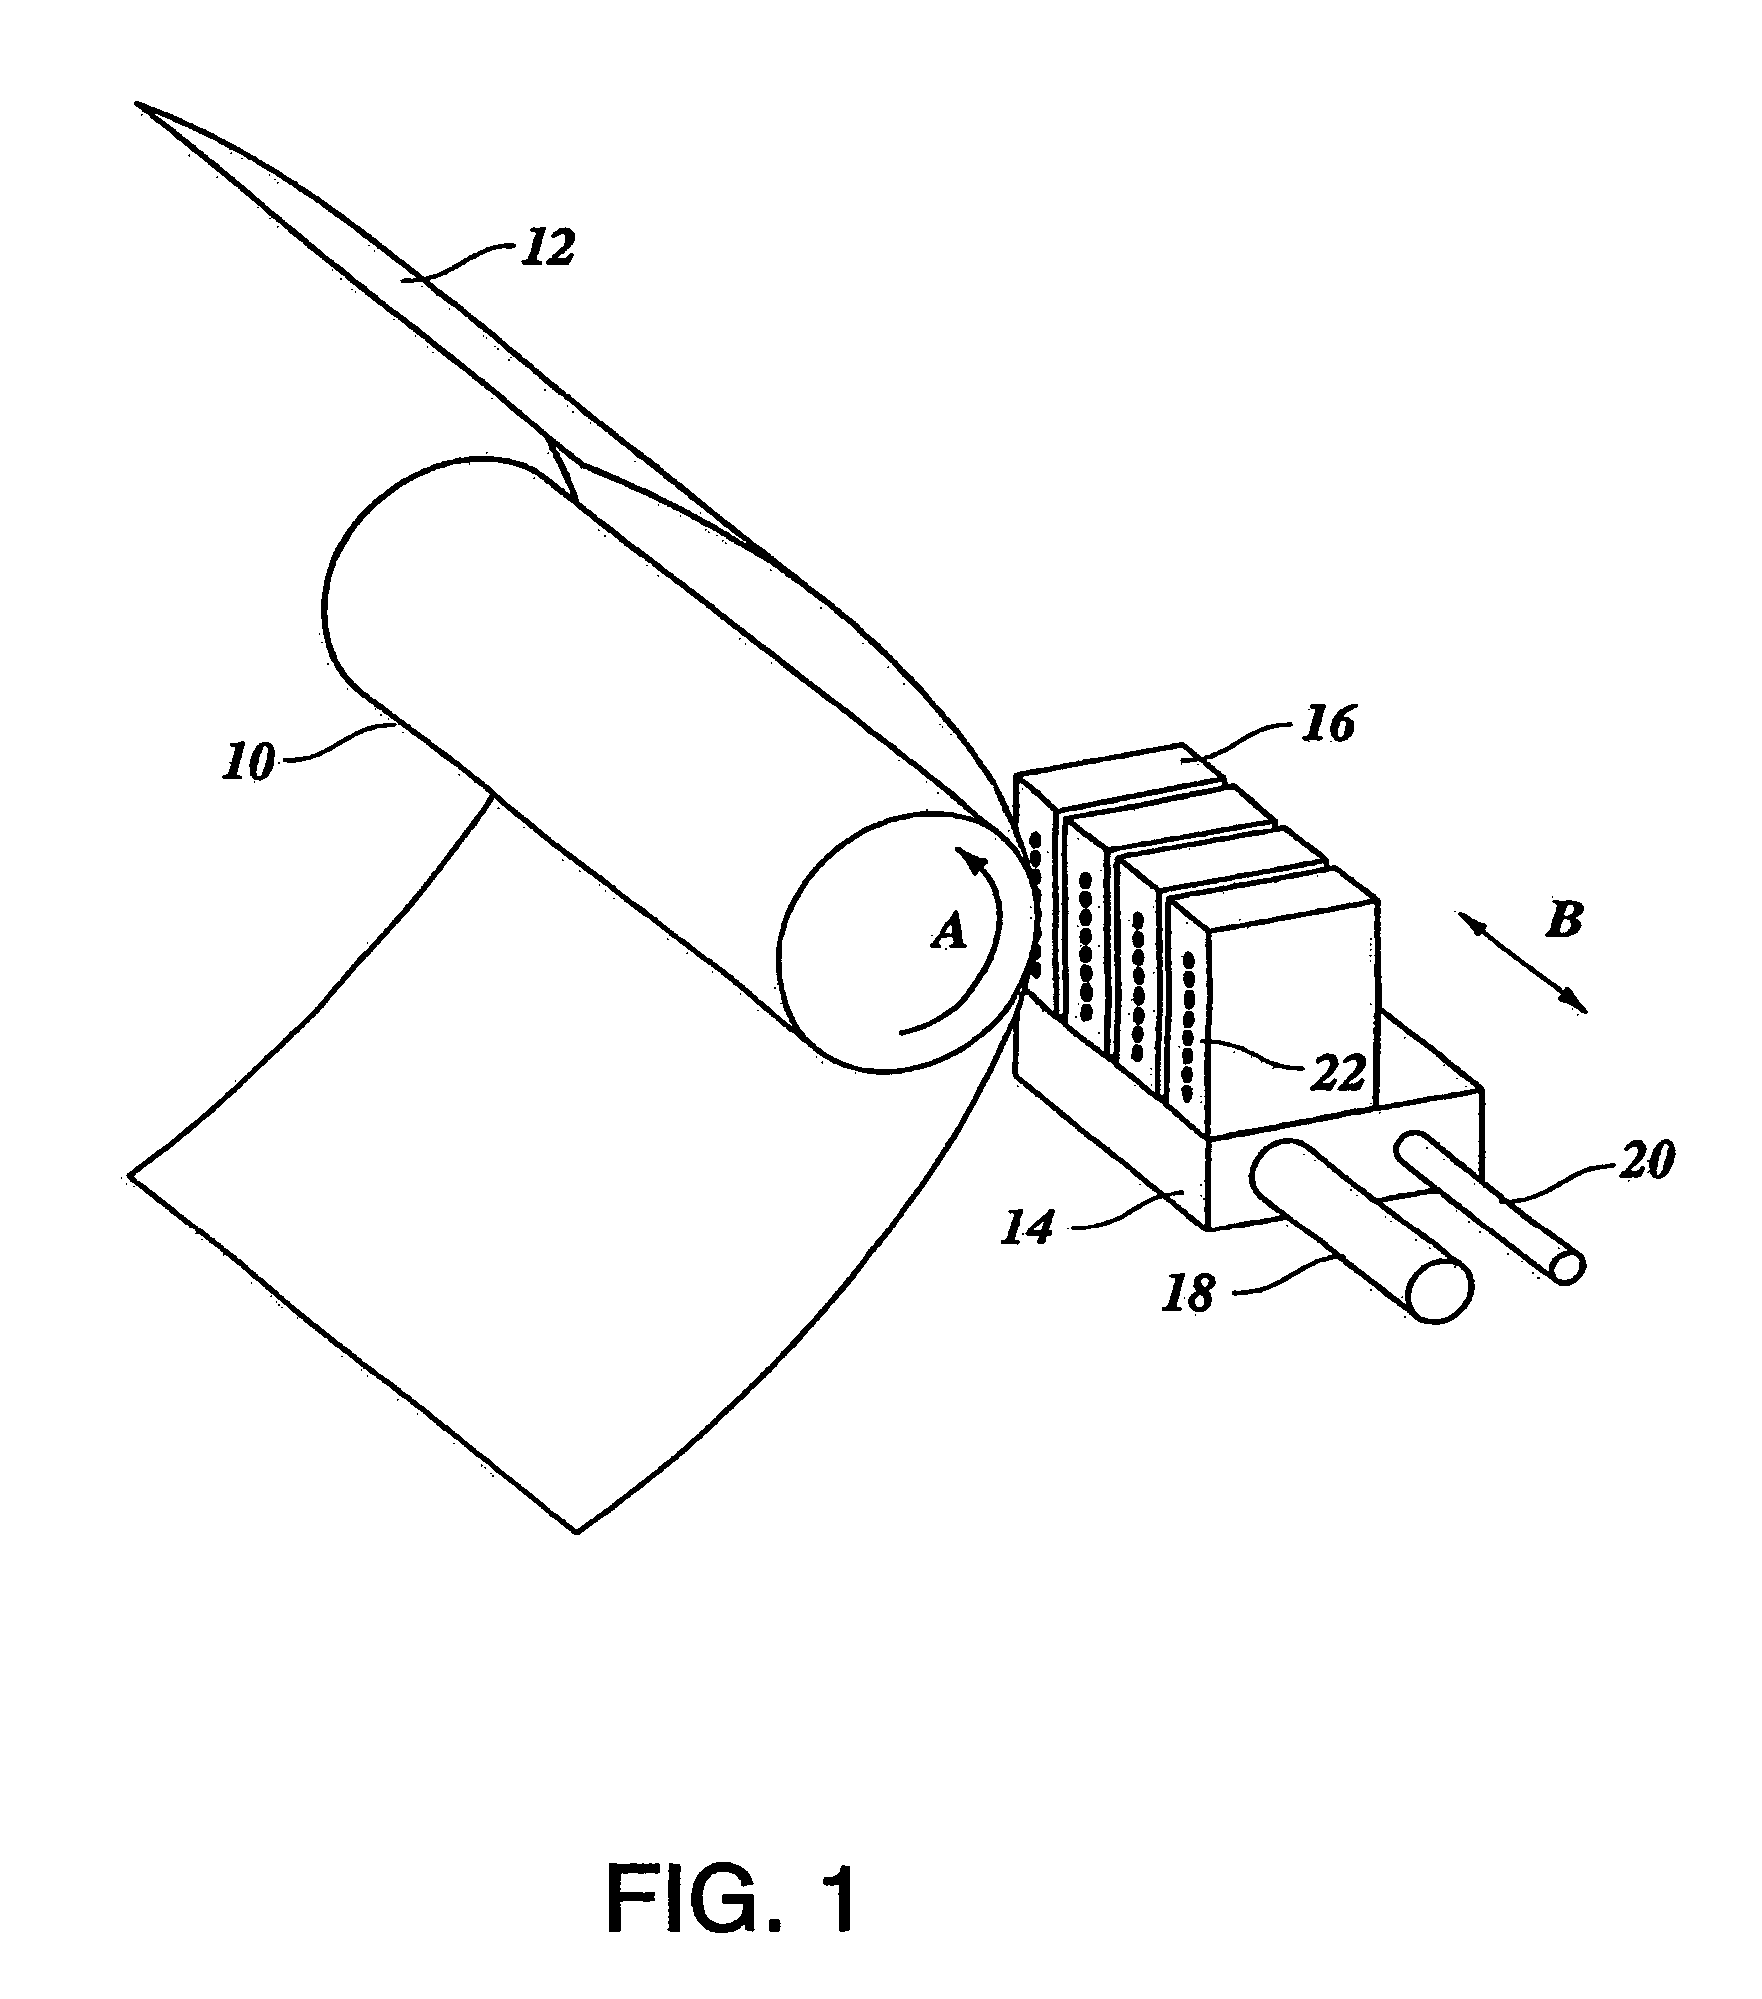 Inkjet system, method of making this system, and use of said system